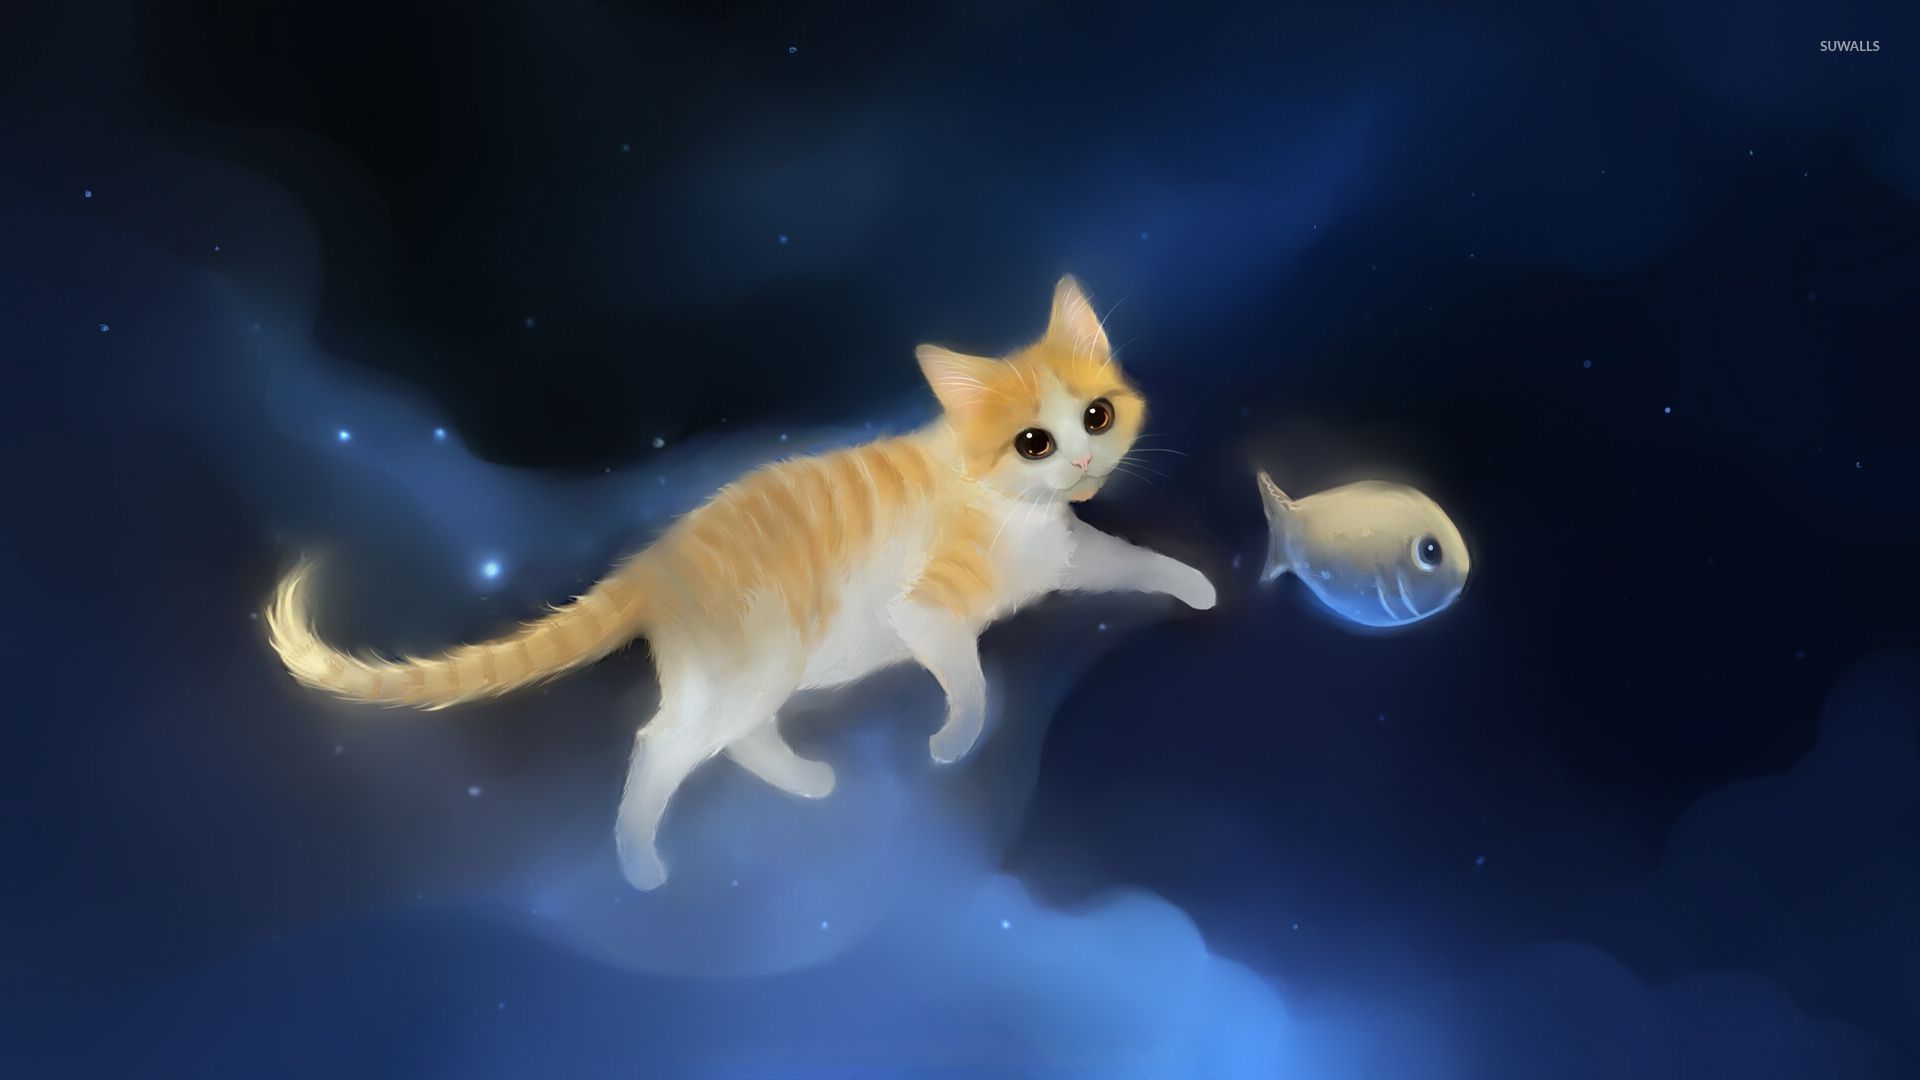 Cat playing with a fish wallpaper - Digital Art wallpapers - #47435